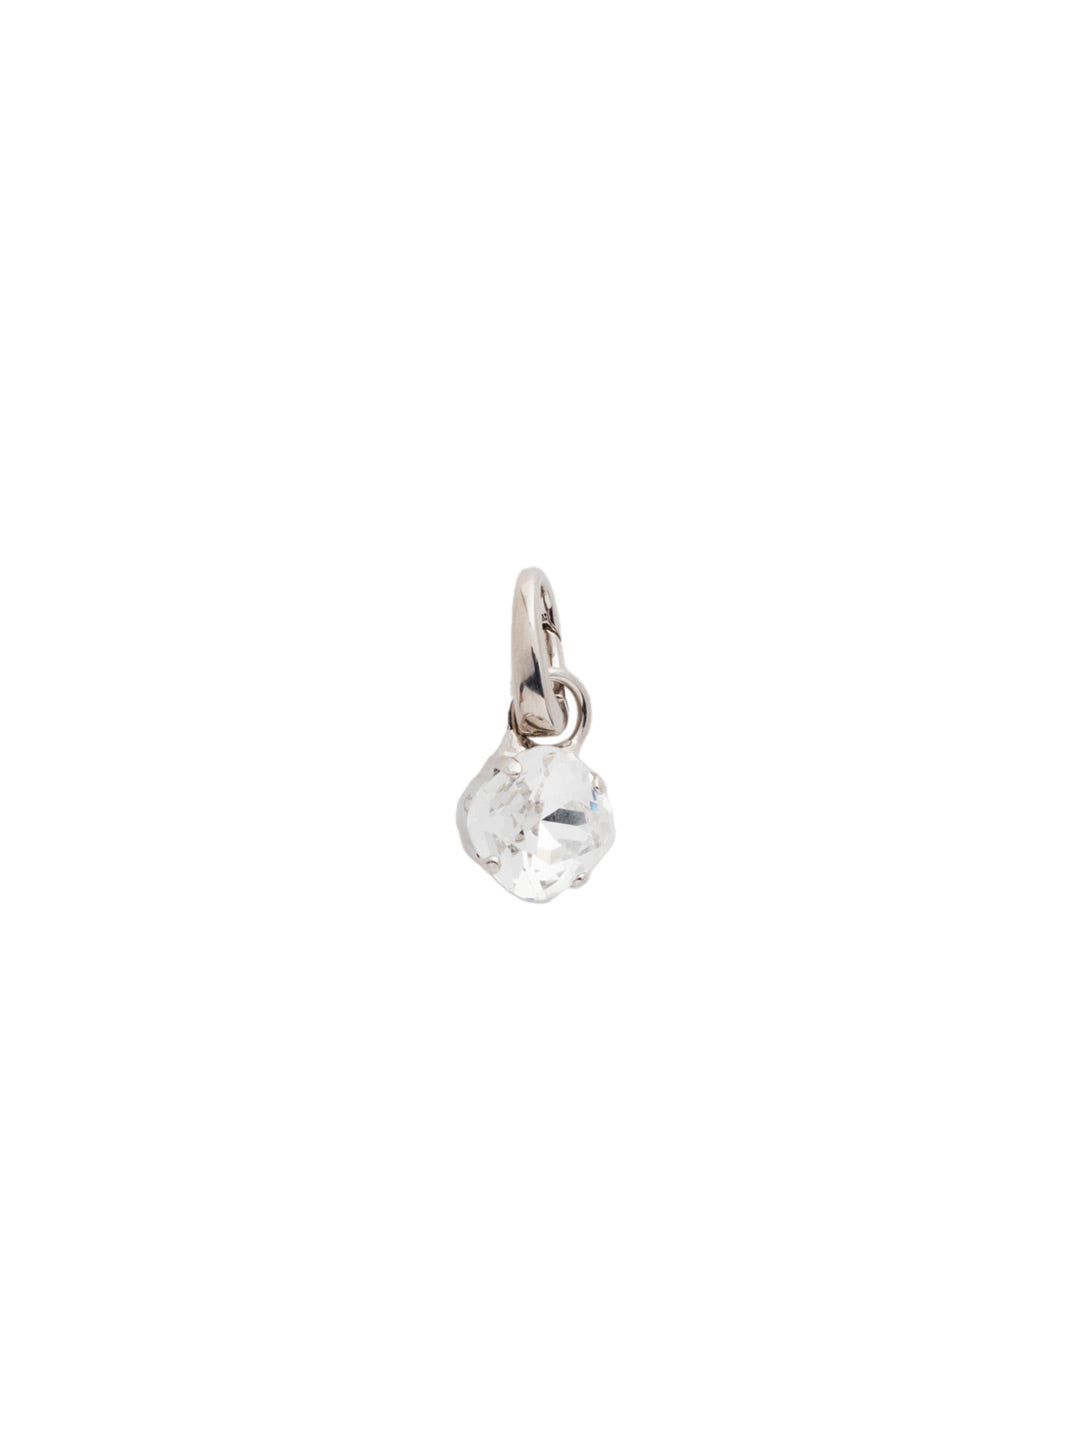 April Birthstone Crystal Charm - CEU1RHCRY - <p>A cushion-cut crystal designed in your beautiful birthstone. Simply attach it to our favorite chain for an everyday look. From Sorrelli's Crystal collection in our Palladium Silver-tone finish.</p>